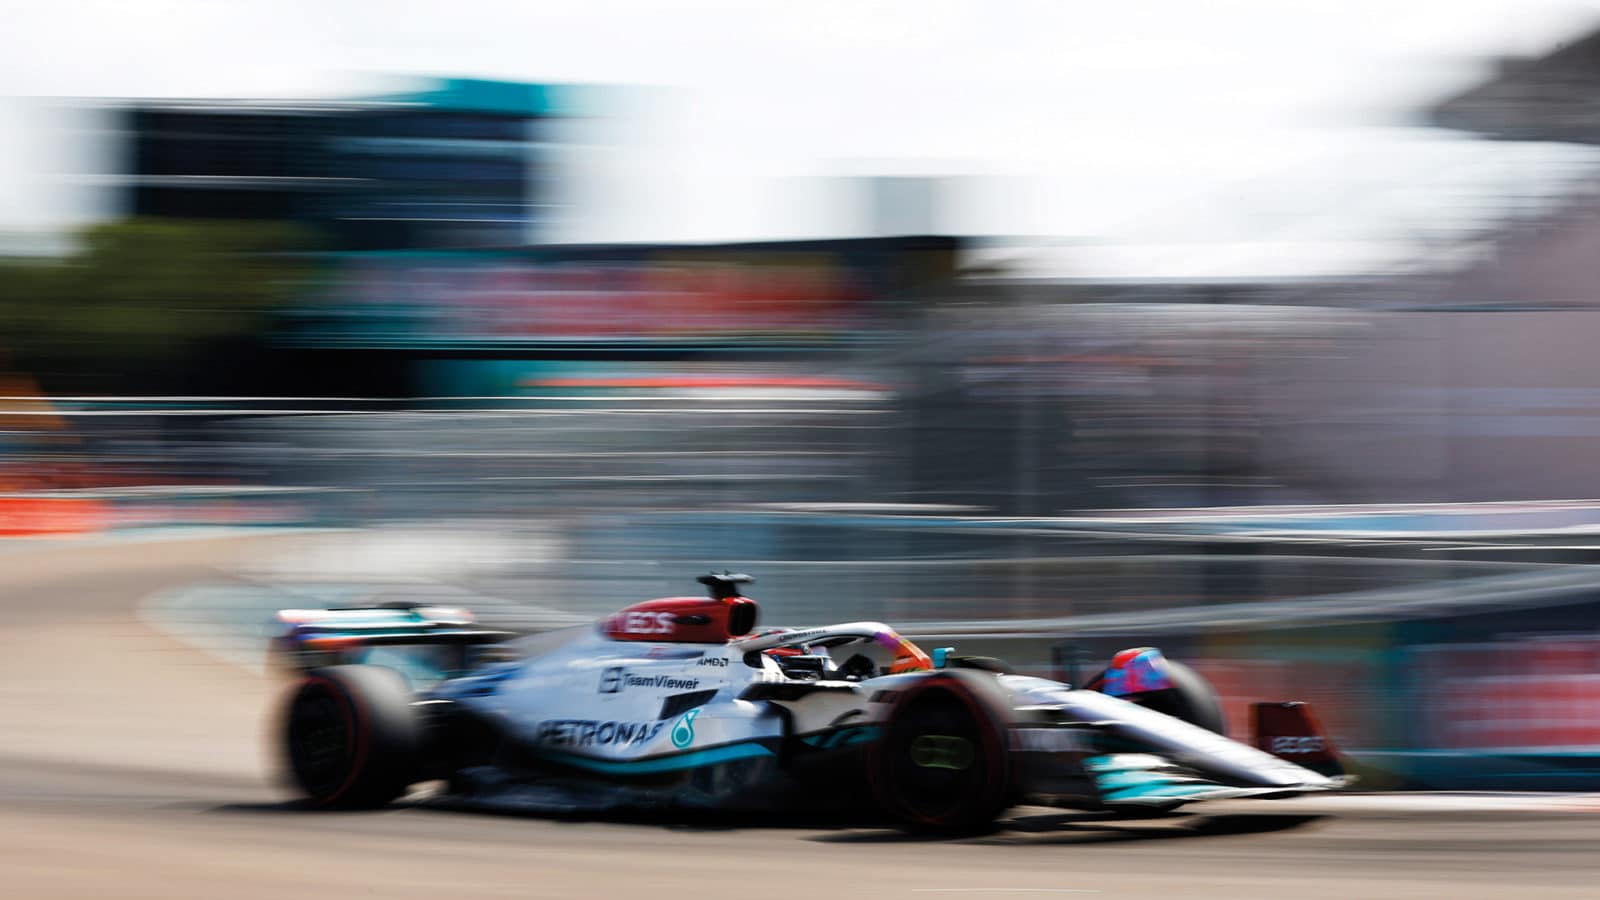 Mercedes of George Russell against the blurred background of the 2022 Miami Grand Prix